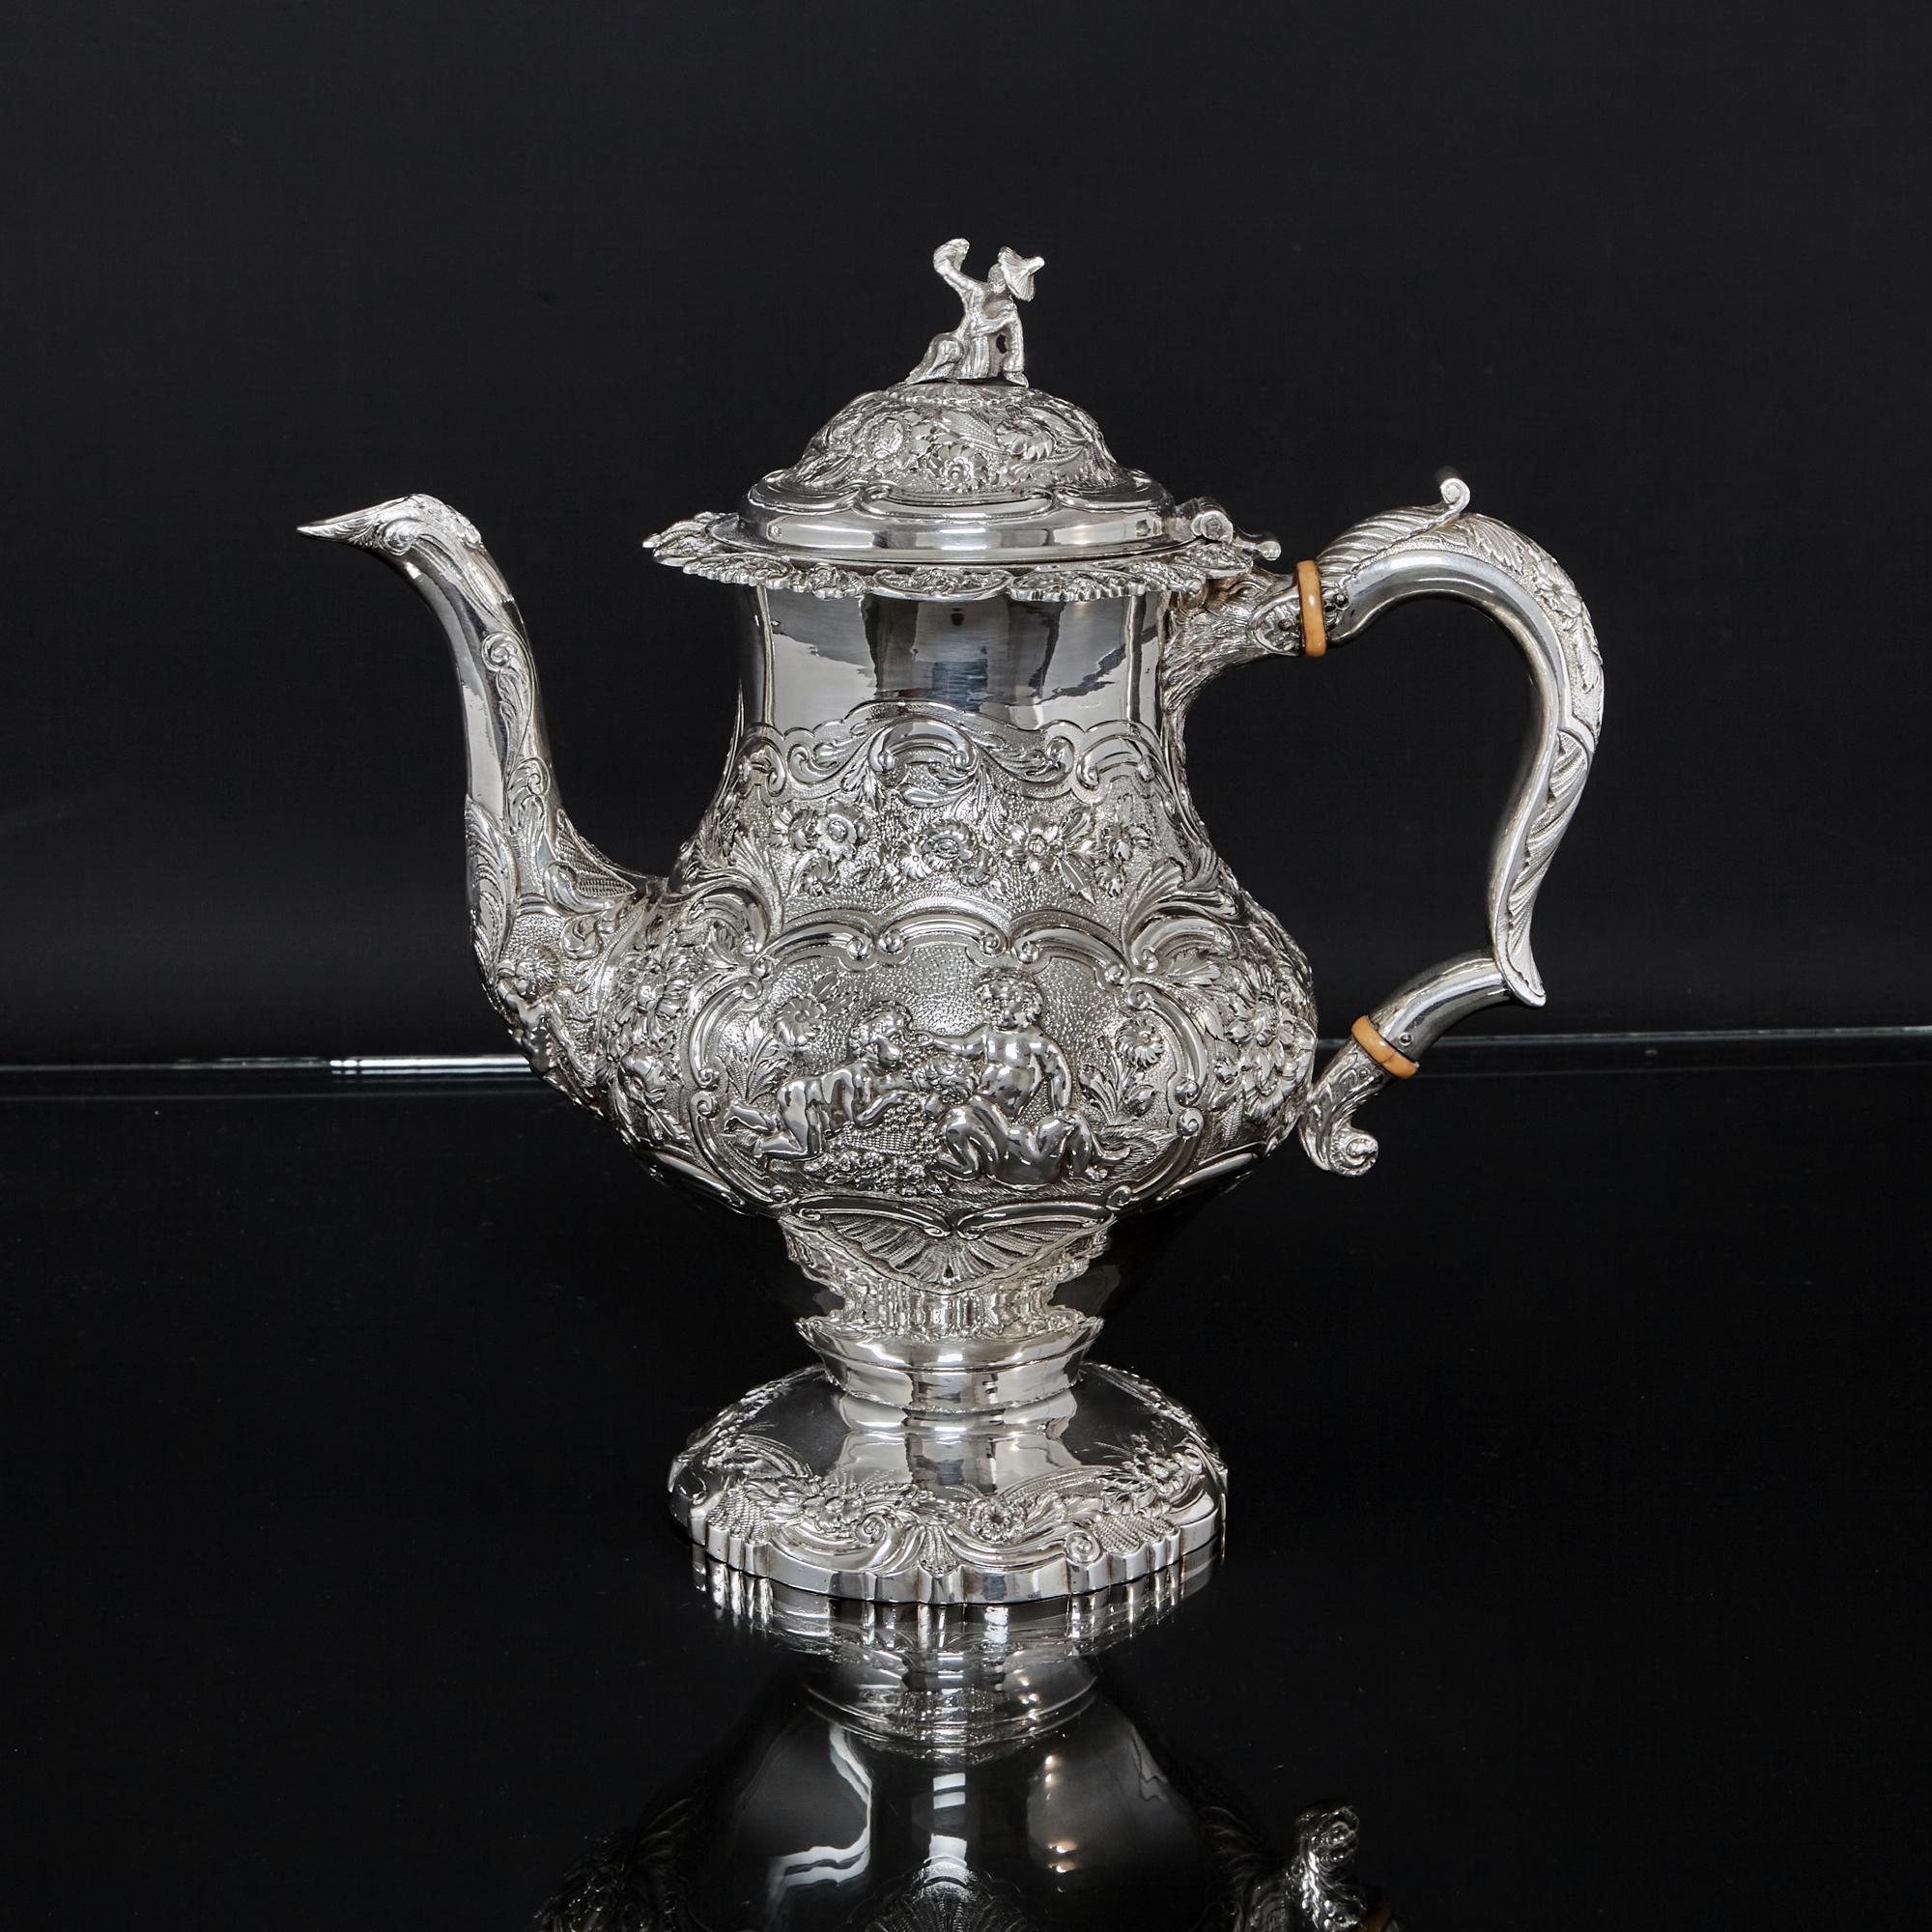 Superb and impressive 5-piece silver tea and coffee service in the rococo style made during the reign of George IV. The elaborate, highly decorative chasing around the bodies depicts the typical exuberant decorations of the period, incorporating